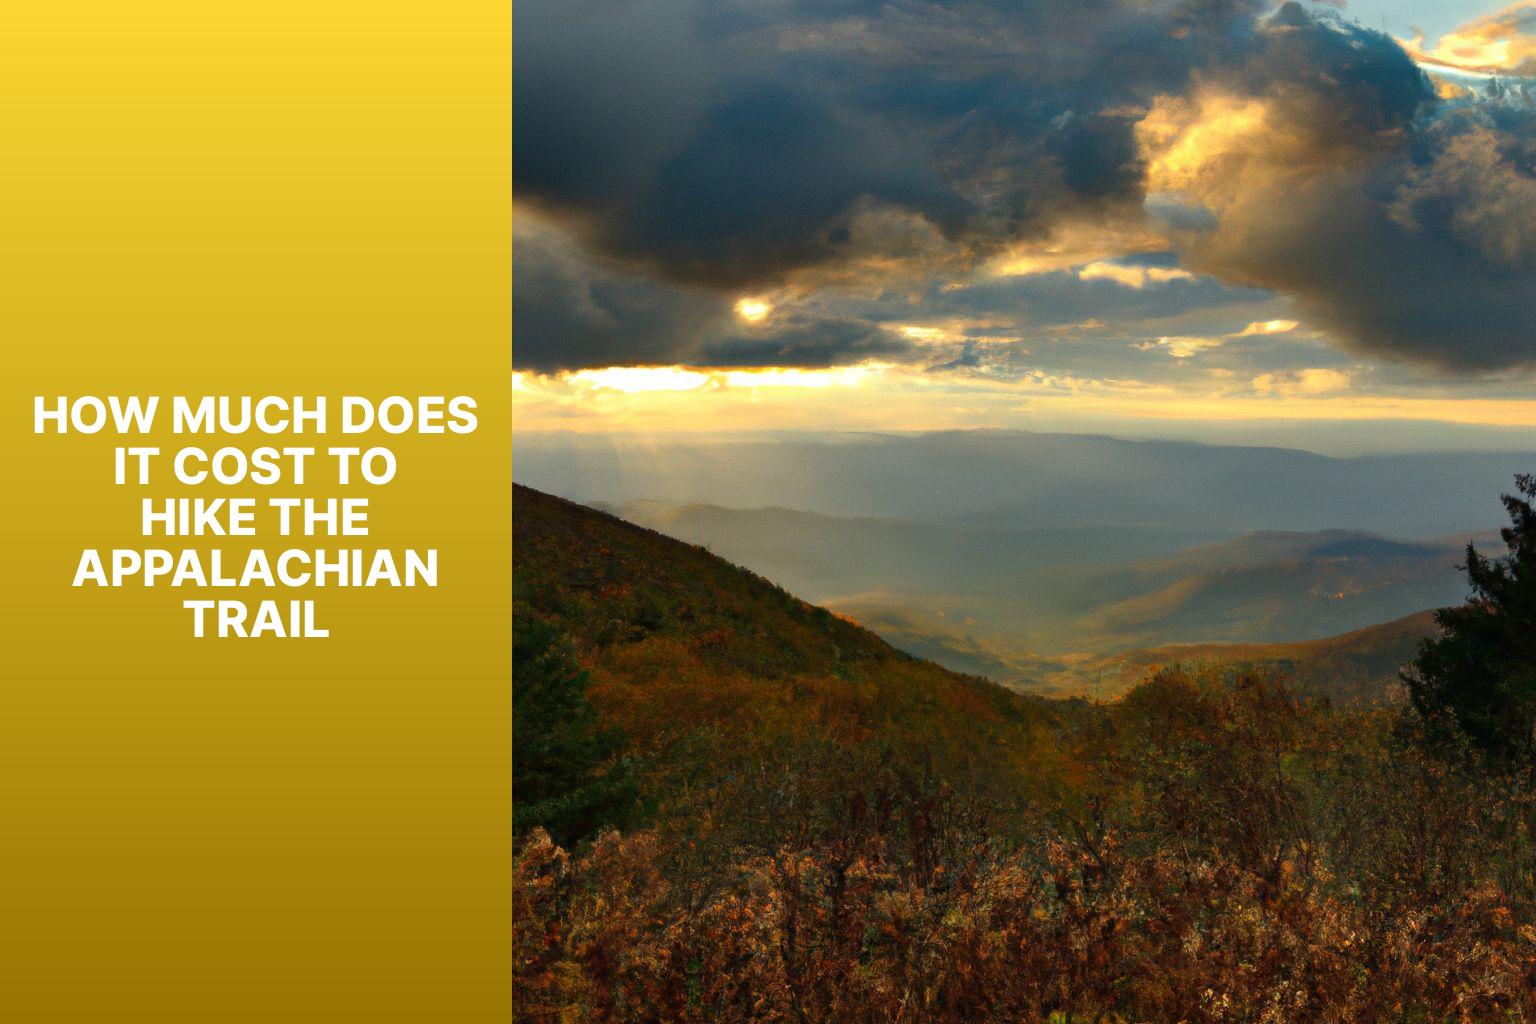 how much does it cost to hike the appalachian trail449b